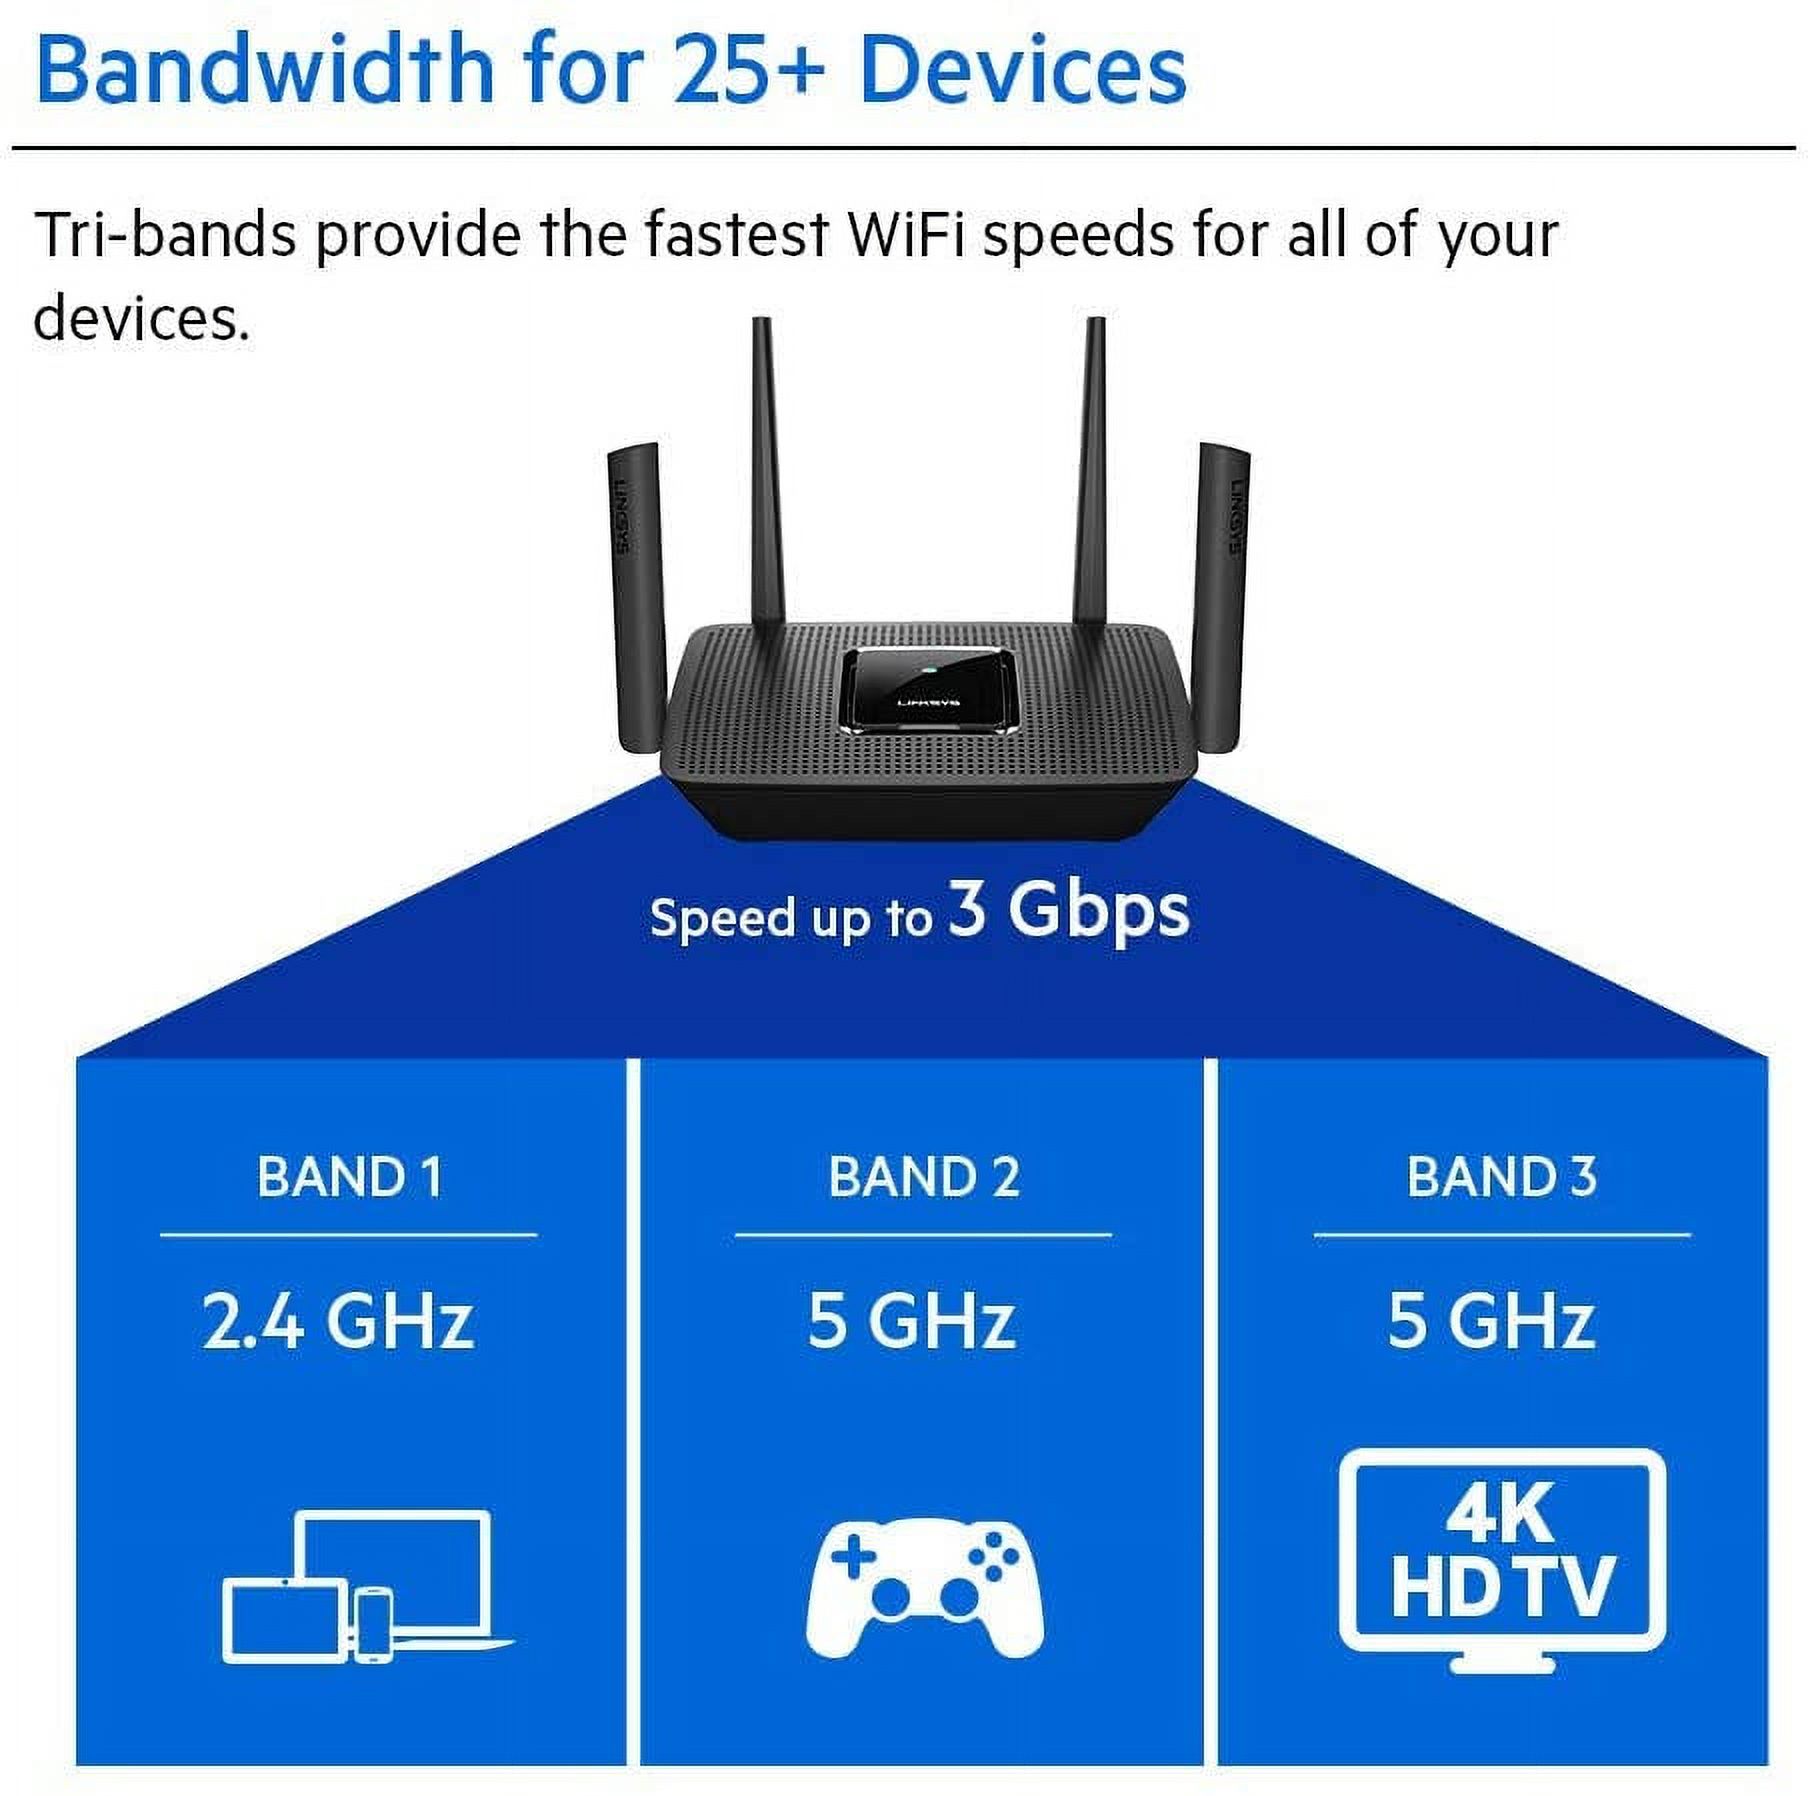 Restored Linksys MR9000 Mesh Wi-Fi Router (Tri-Band Router, Wireless Mesh Router for Home AC3000), Future-Proof MU-Mimo Fast Wireless Router (Refurbished) - image 2 of 7